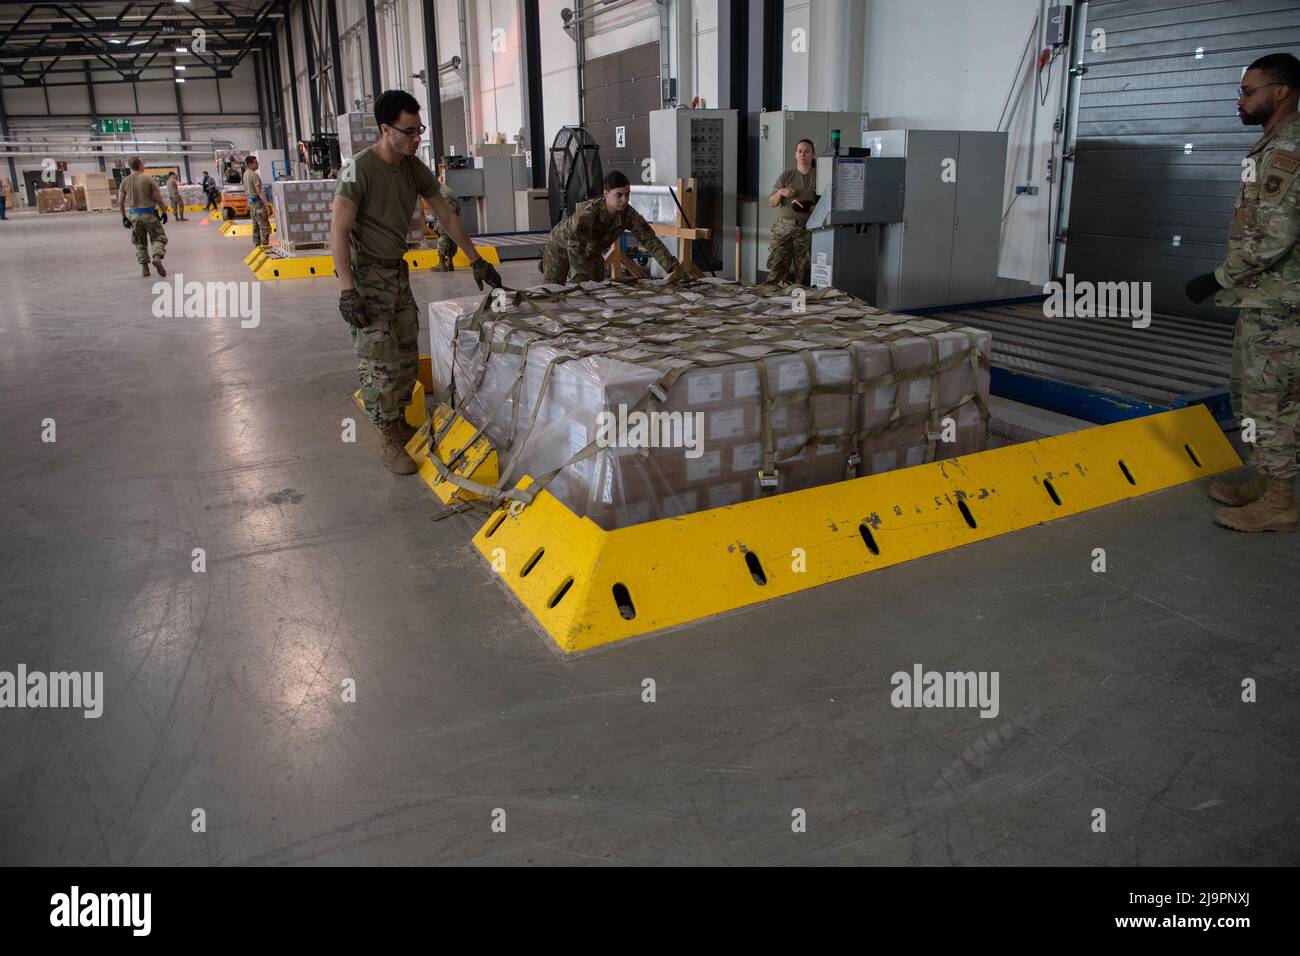 U.S. Air Force Airmen assigned to the 721st Aerial Port Squadron place netting on a pallet of infant formula at Ramstein Air Base, Germany, May 21, 2022. The infant formula arrived from Switzerland as part of the U.S. Government’s Operation Fly Formula to rapidly transport infant formula to the United States due to critical shortages there.  The formula will be transported to Plainfield, Indiana via a U.S. Air Force C-17 Globemaster III coordinated by U.S. Transportation Command and Air Mobility Command. (U.S. Air Force photo by Airman 1st Class Alexcia Givens) Stock Photo